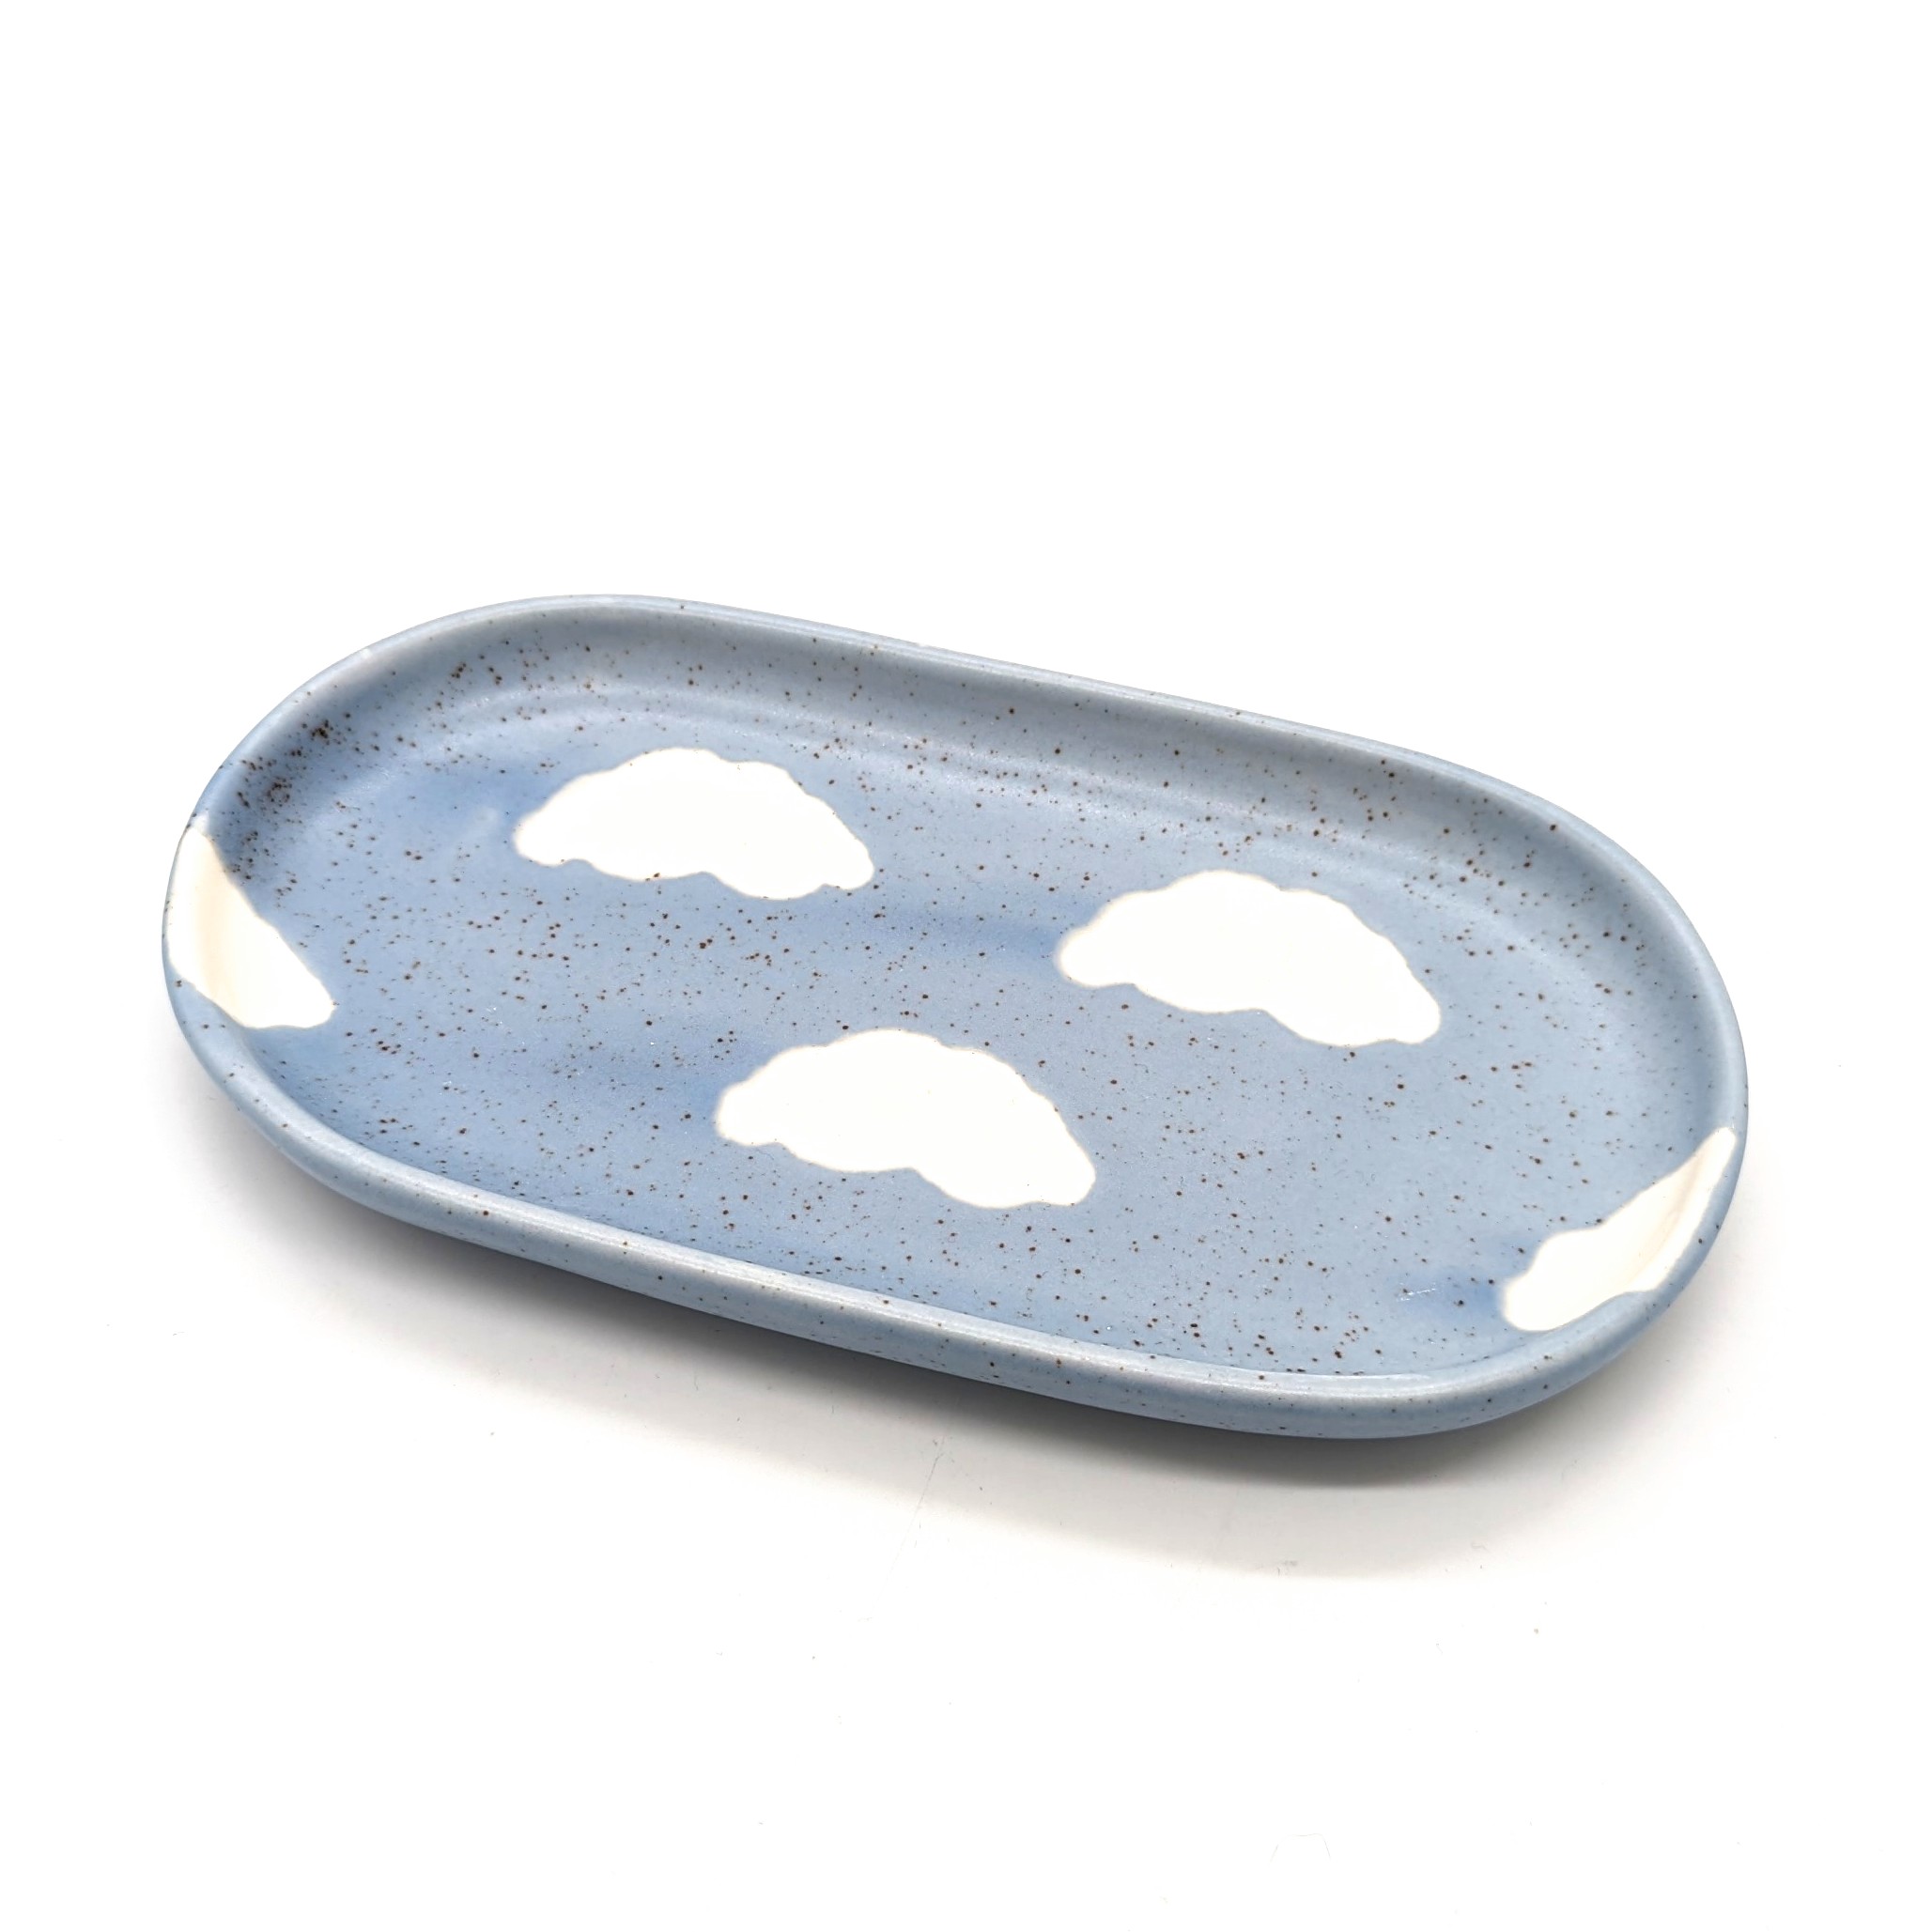 egg-back-home-cloud-mini-tray-limited-edition